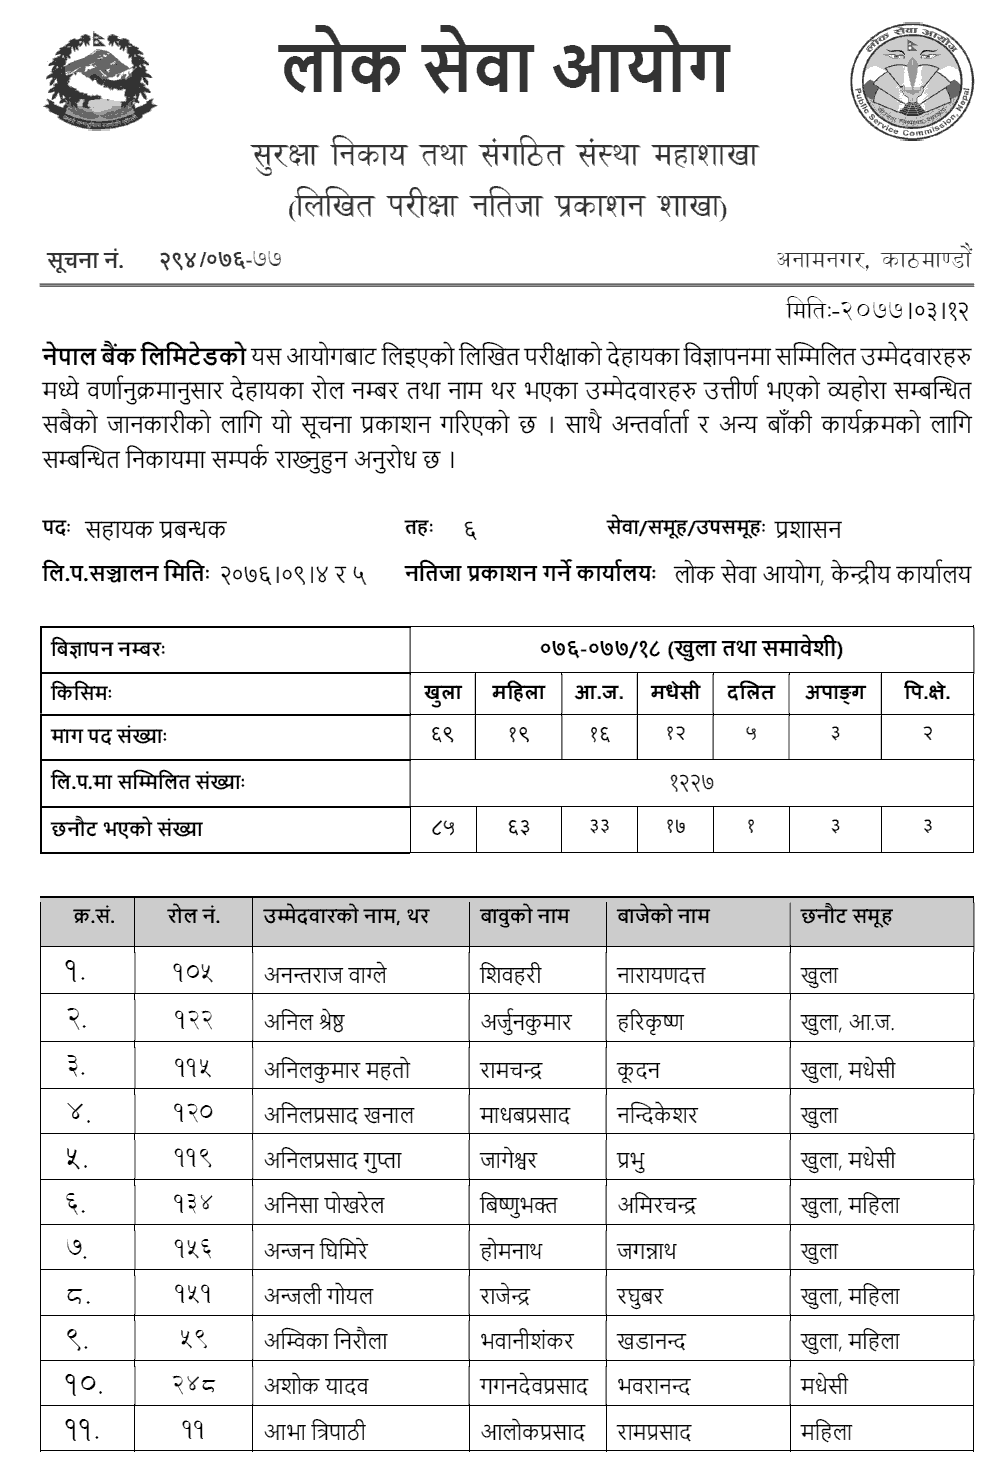 Nepal Bank Limited Written Exam Result of Assistant Manager